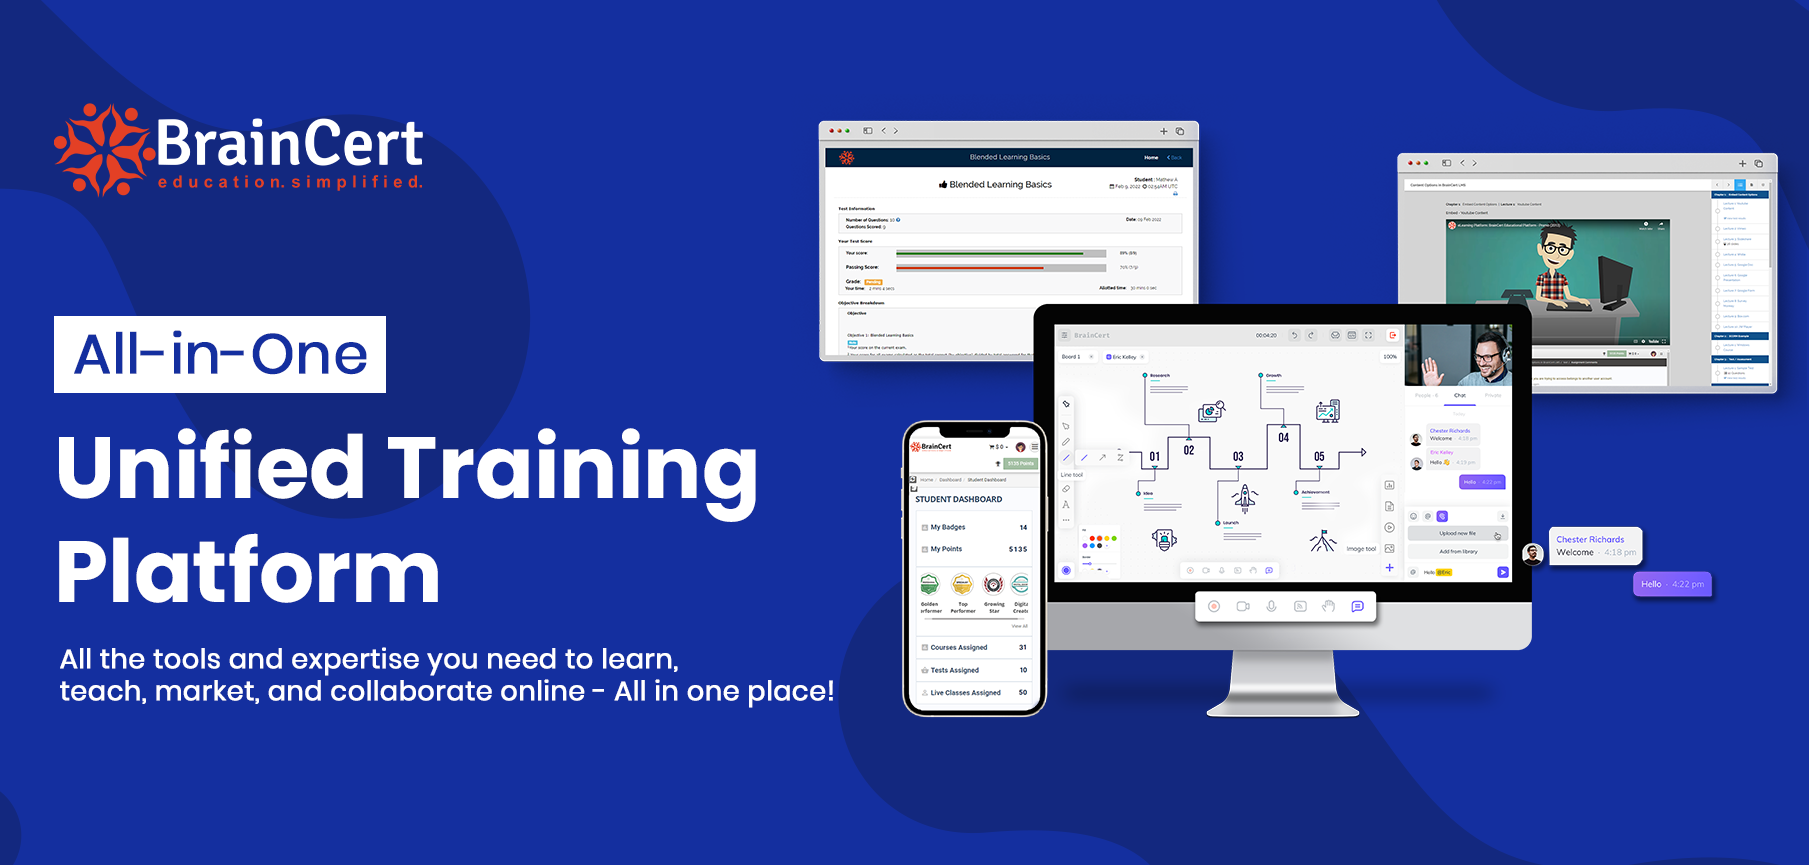 BrainCert offers all the essential building blocks to create a robust and cost-effective eLearning ecosystem in the cloud without worrying about scalability, performance and security posture.